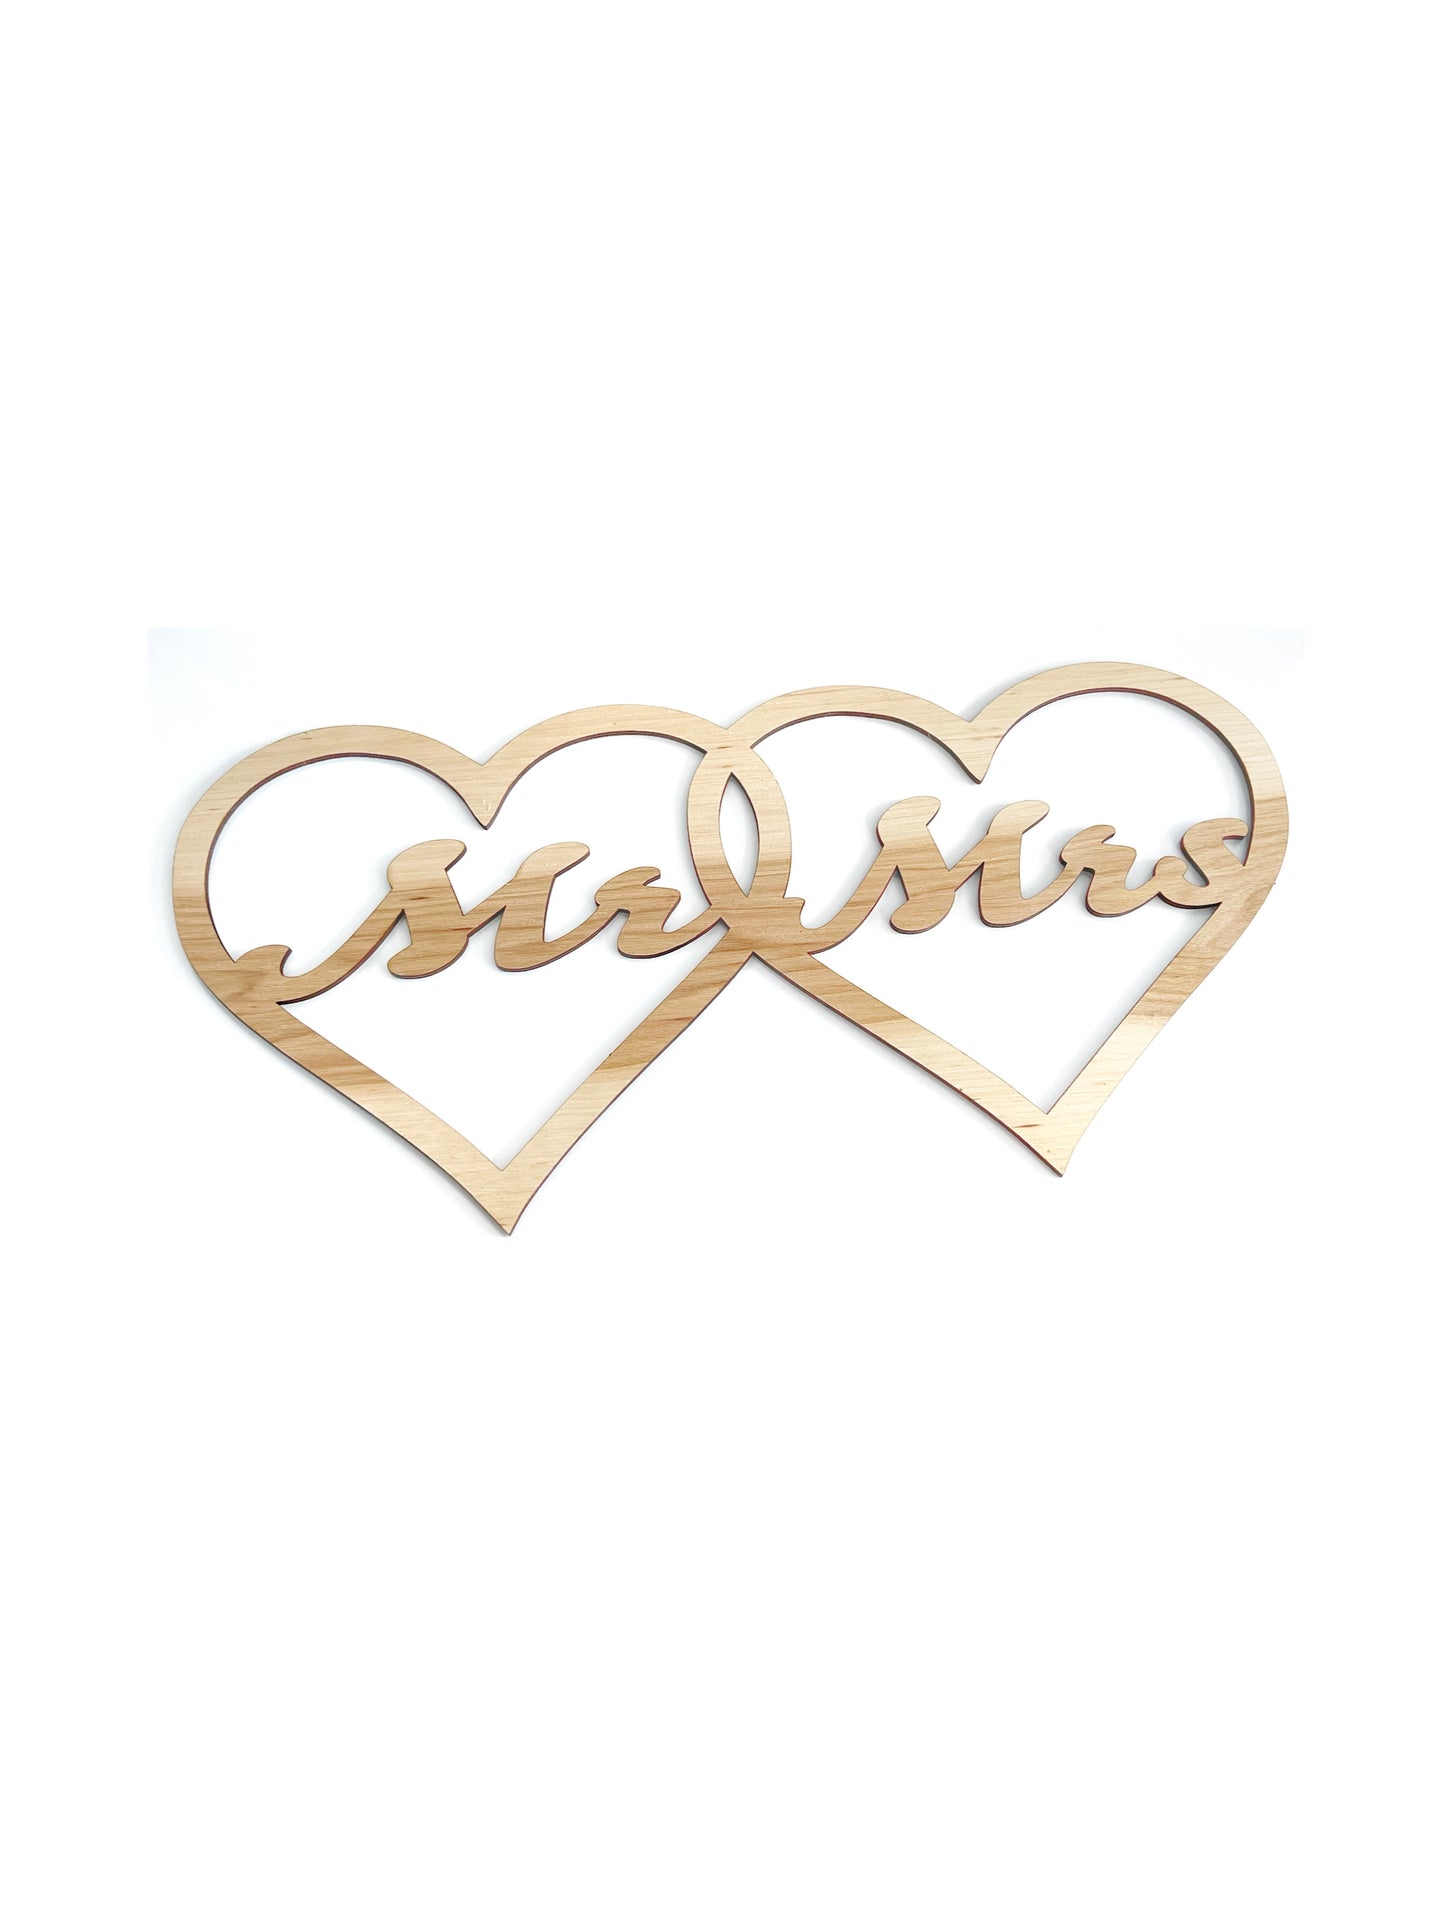 Married Wood Crossing Hearts Sign Mr & Mrs, Mr & Mr, Mrs & Mrs Customizable